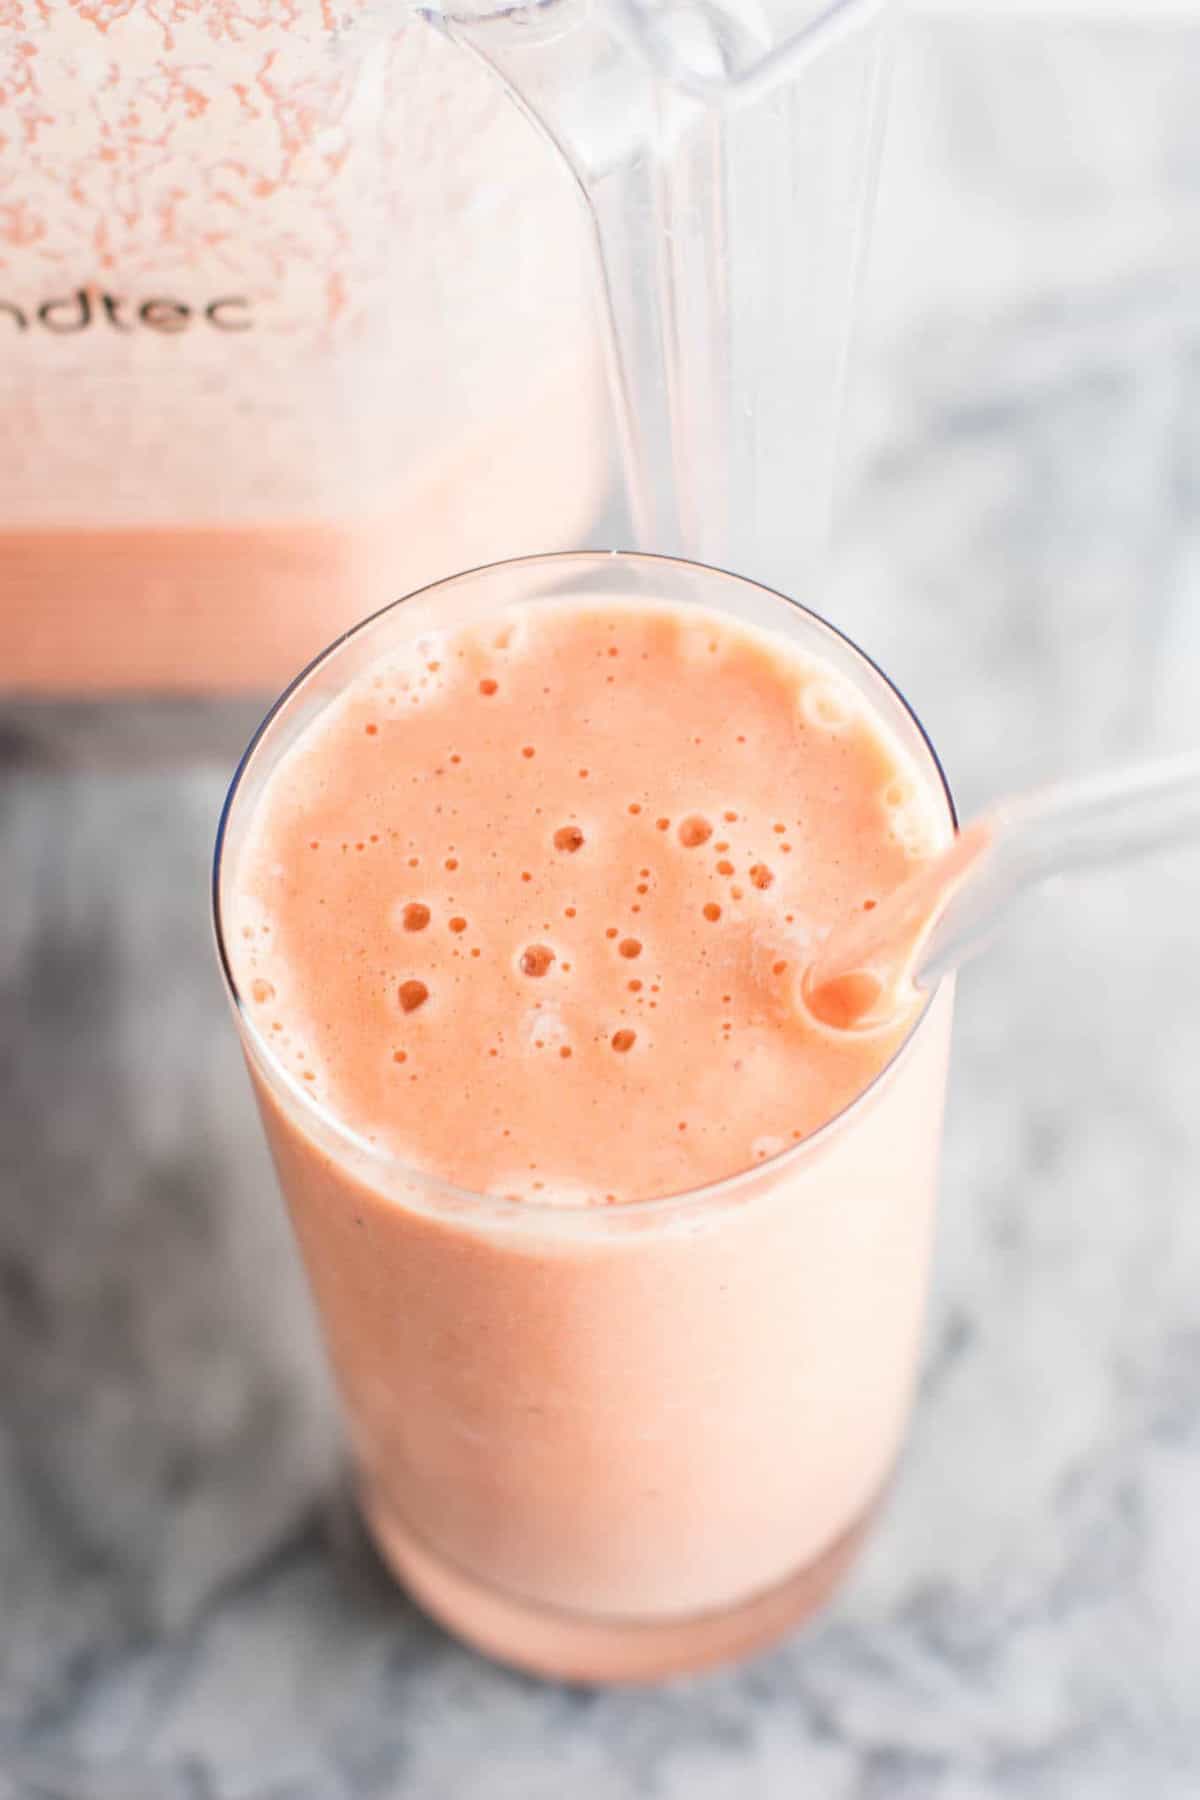 Healthy carrot cake smoothie recipe. Breakfast? Dessert? It can be either! Get your veggies in with this indulgently delicious smoothie! #carrotcakesmoothie #smoothie #greekyogurt #breakfast #dessert